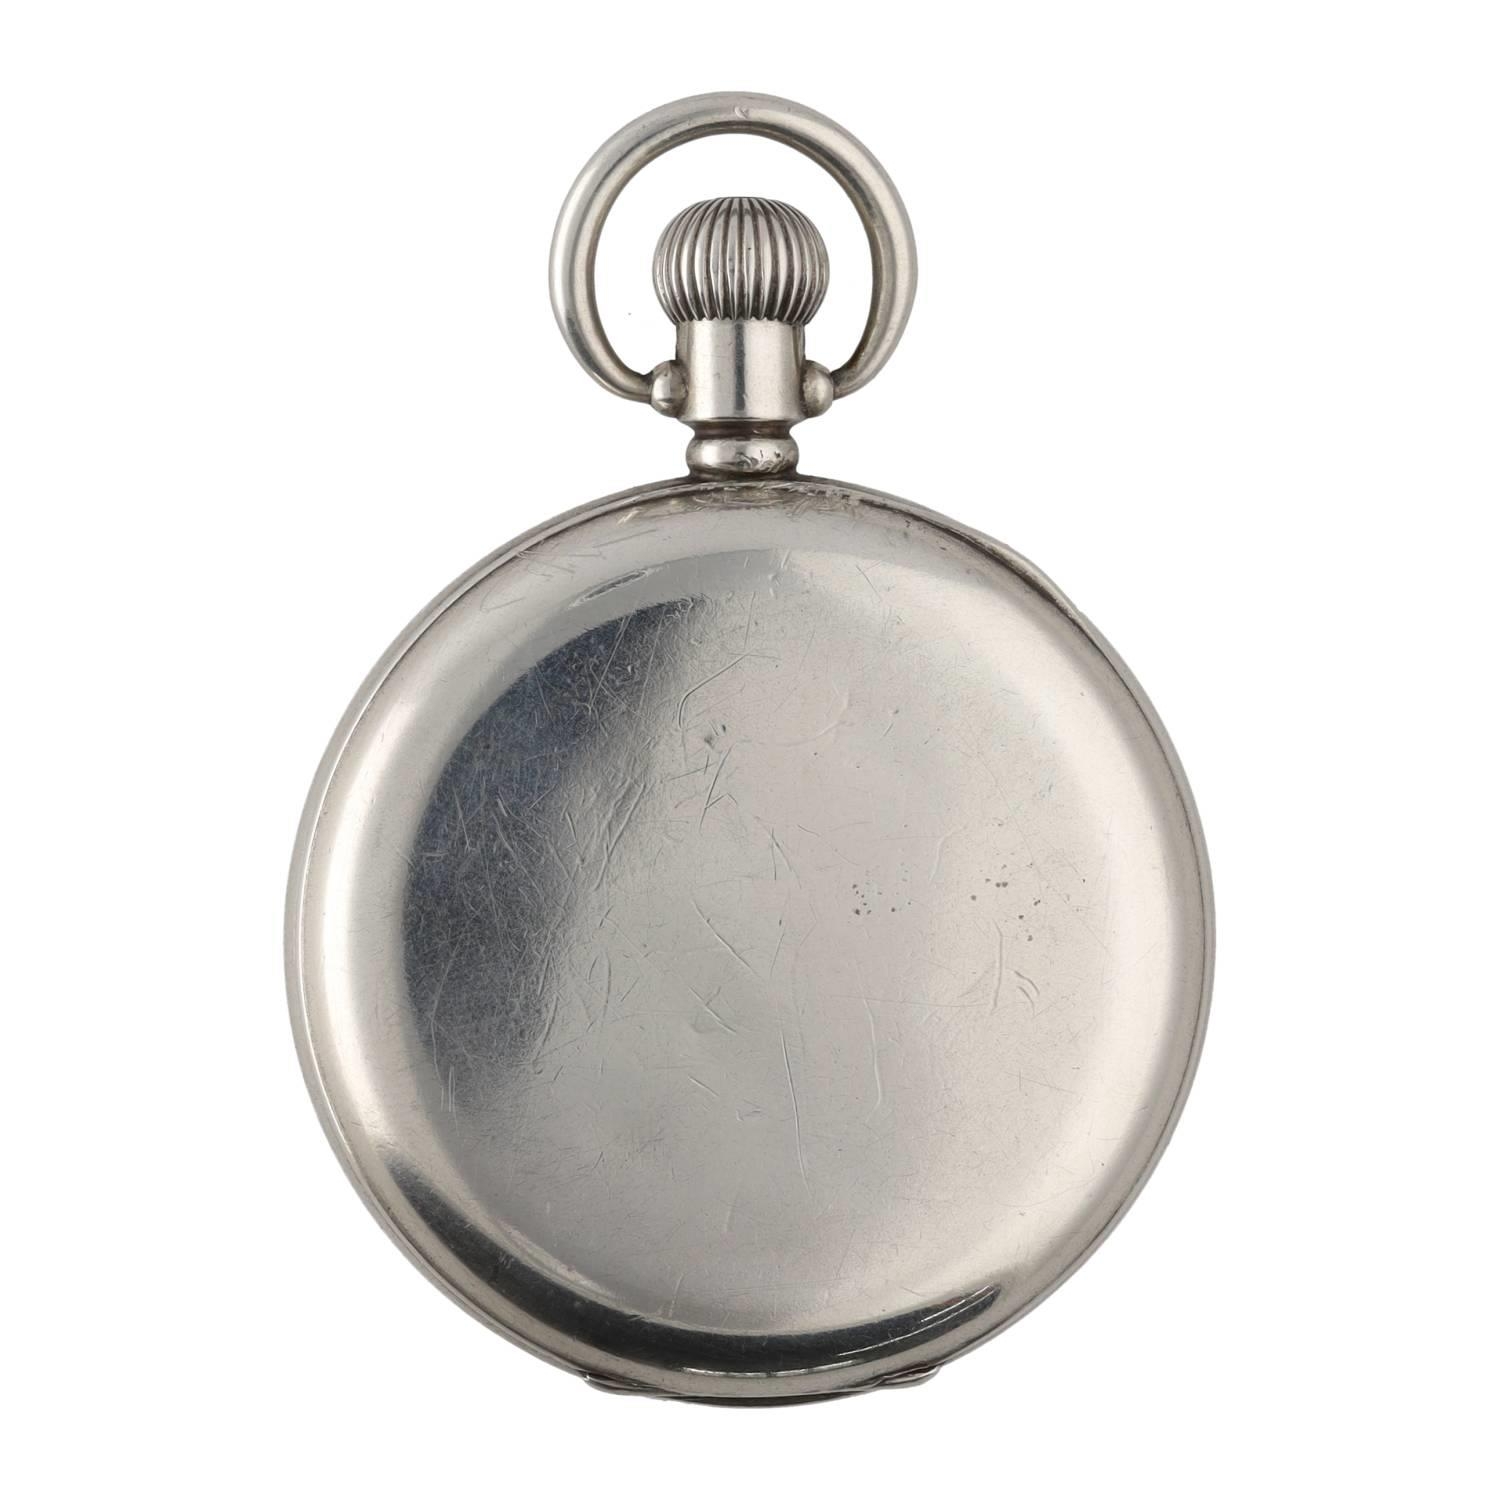 American Waltham silver lever pocket watch, circa 1920, serial no. 23853122, signed movement, hinged - Image 3 of 3